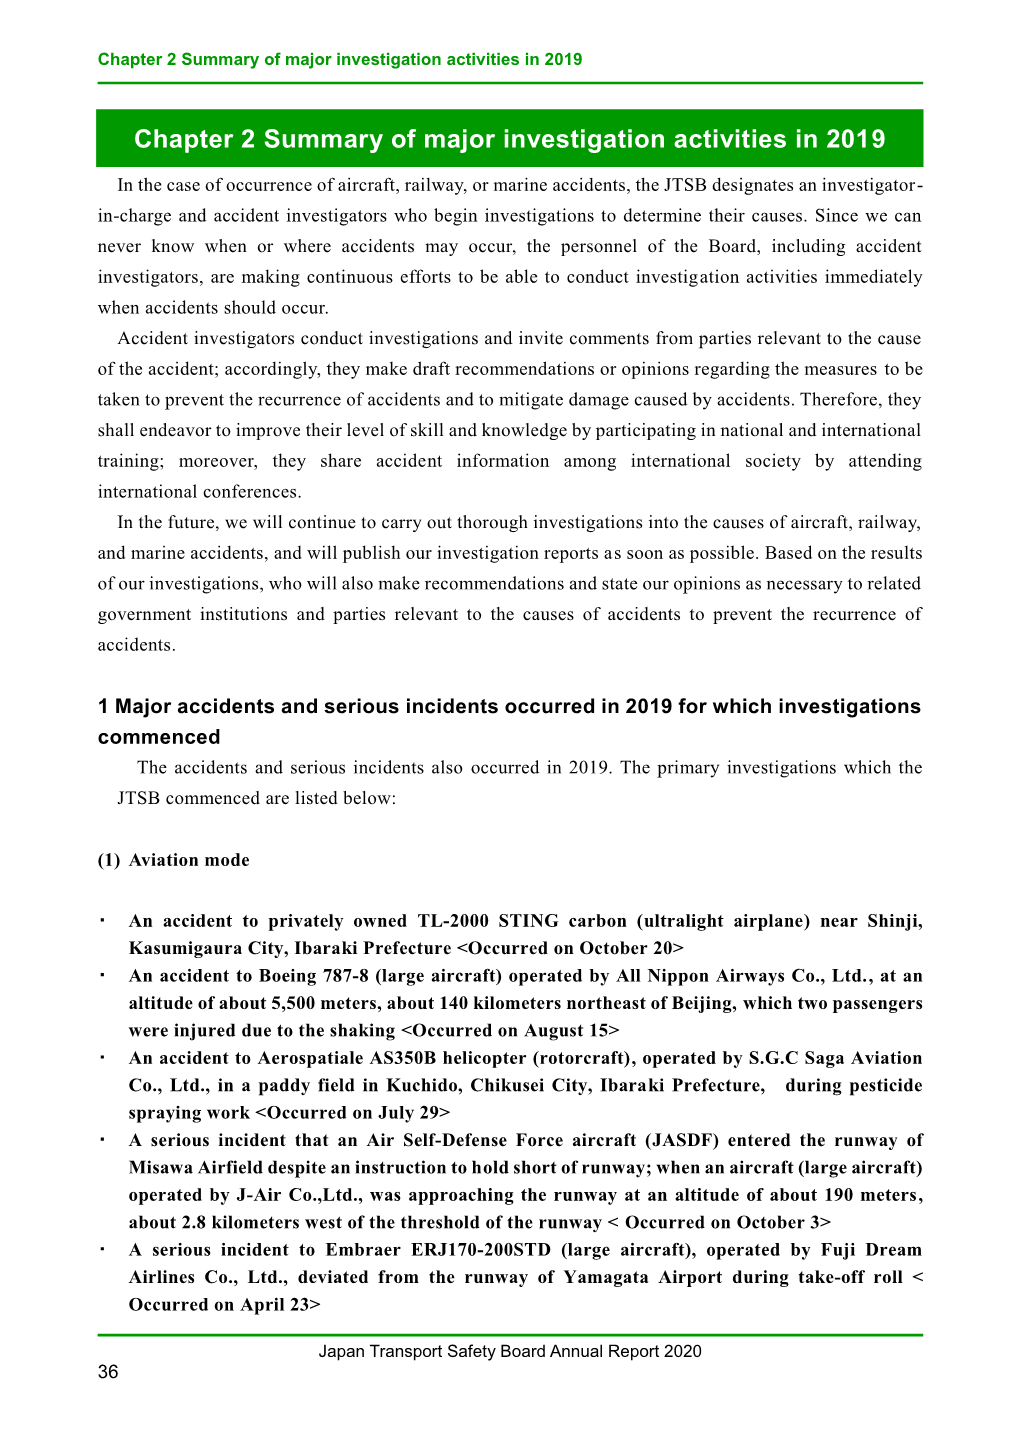 Chapter 2 Summary of Major Investigation Activities in 2019